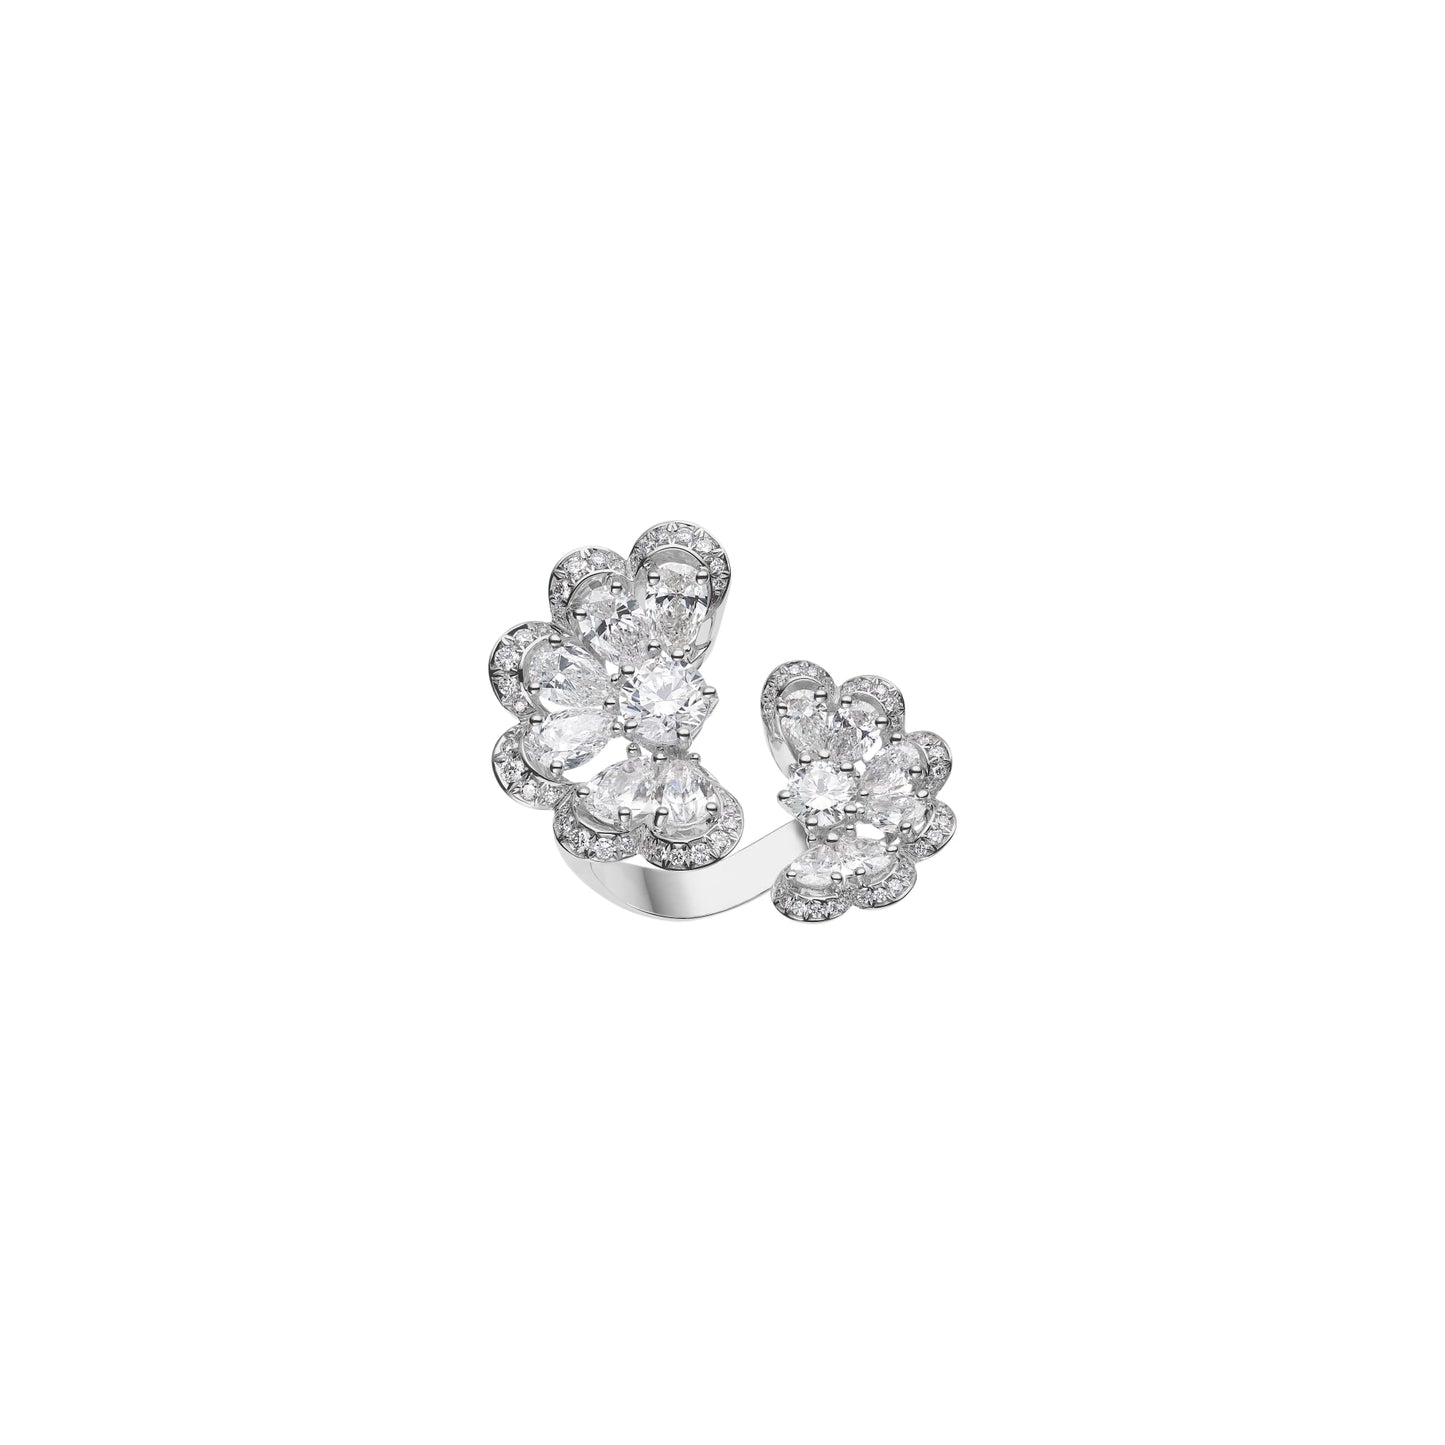 PRECIOUS LACE NUAGE RING, ETHICAL WHITE GOLD, DIAMONDS 828351-1010